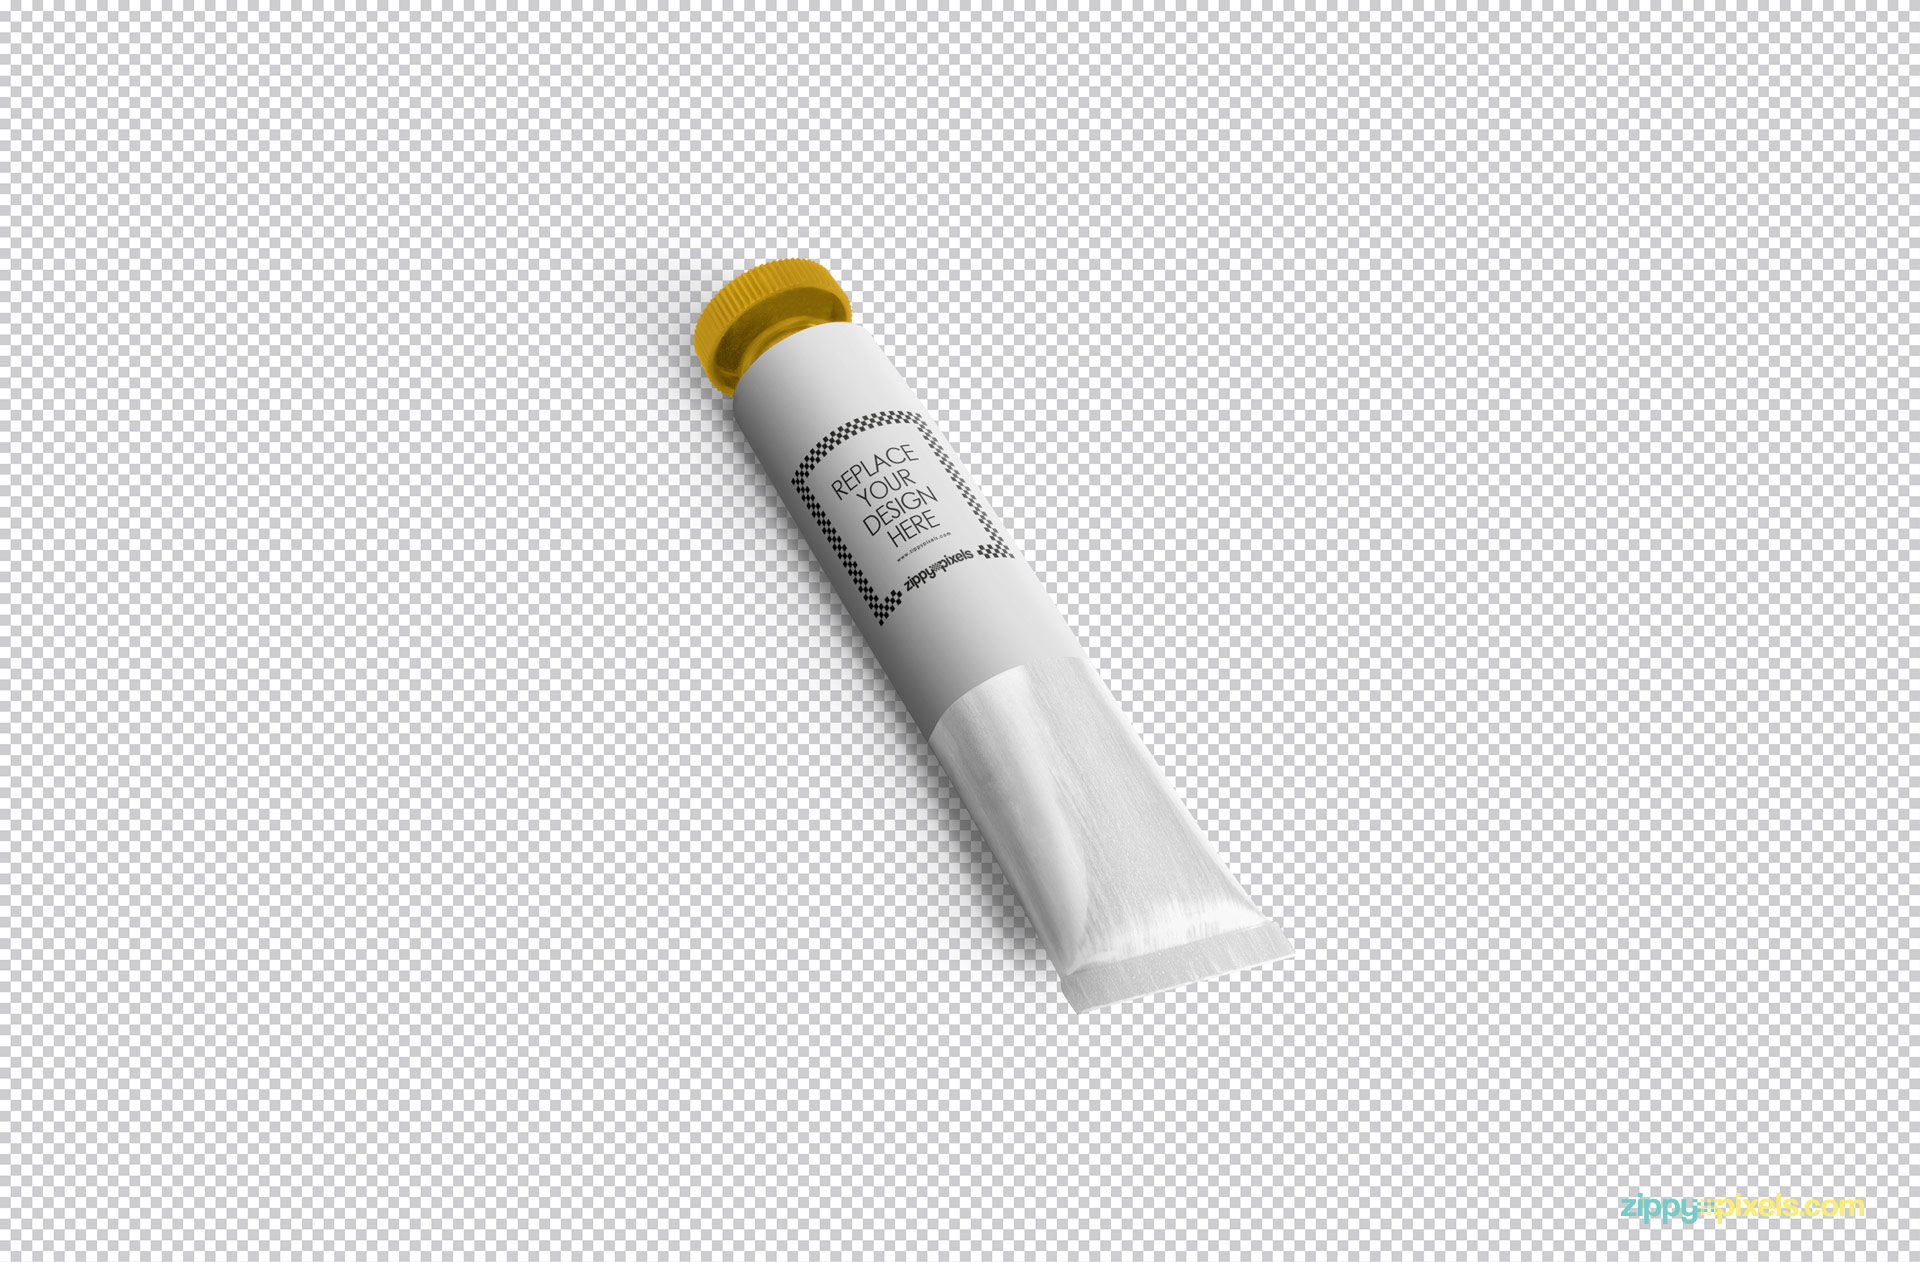 Cap color of this packaging tube mockup can be changed according to your requirements.